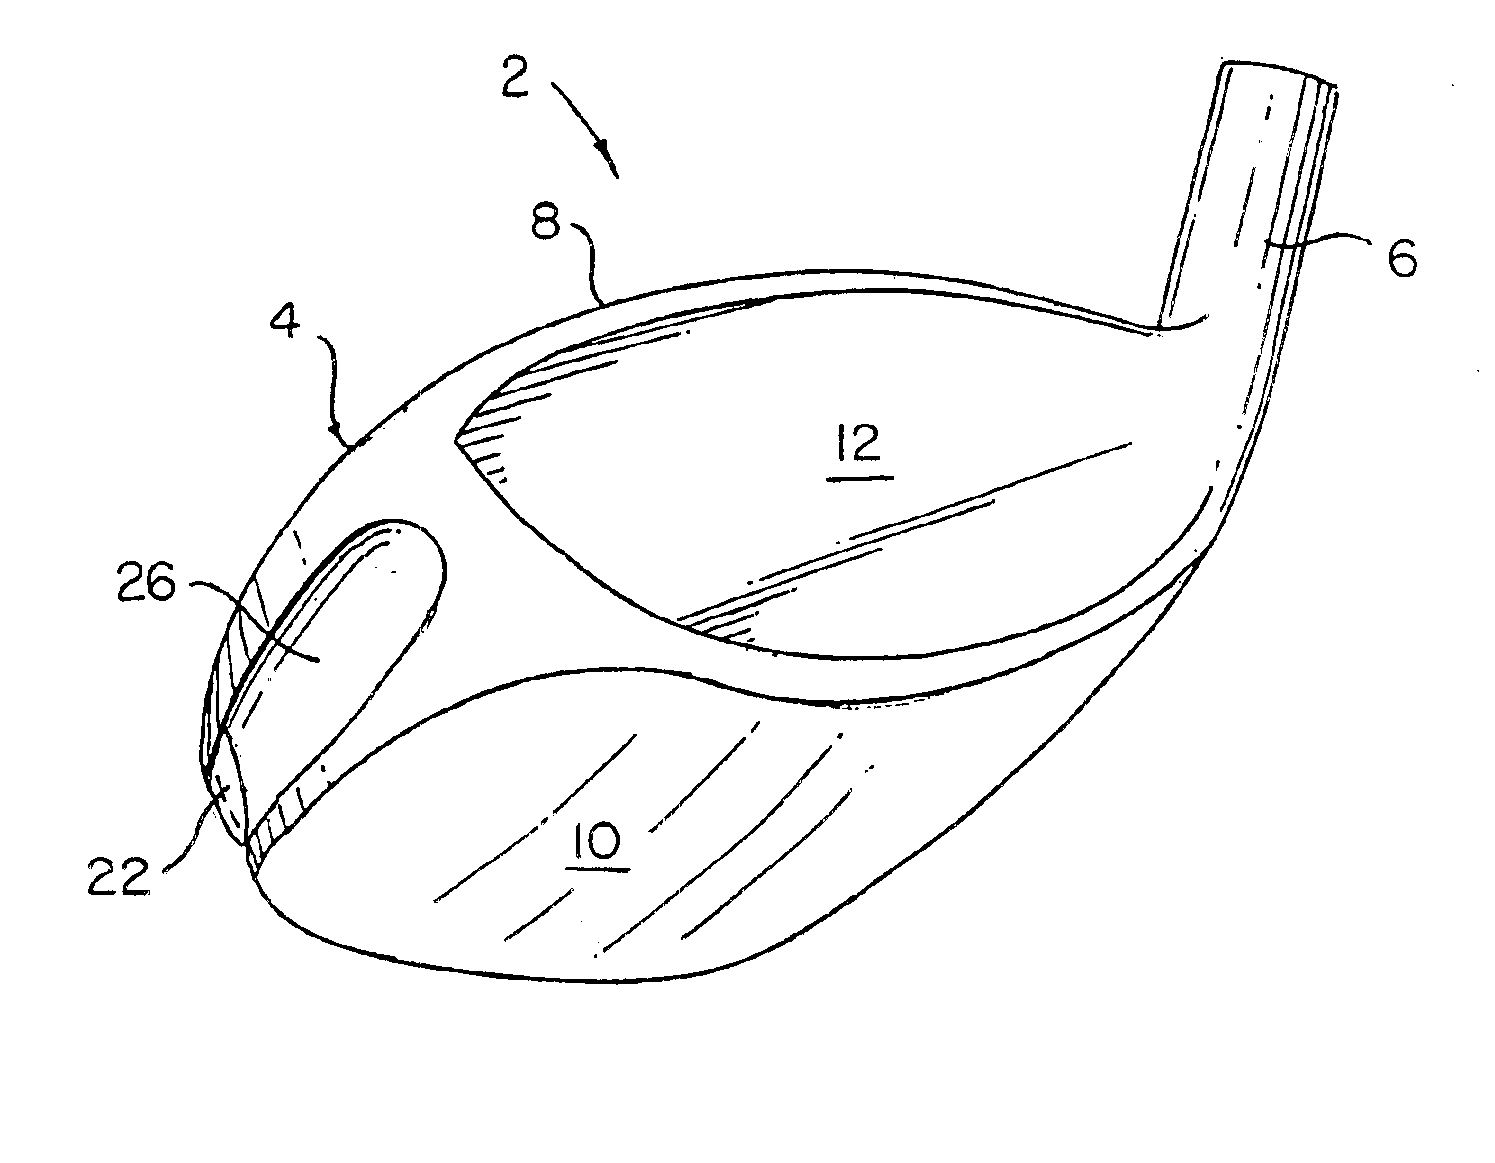 Golf club head with peripheral weighting